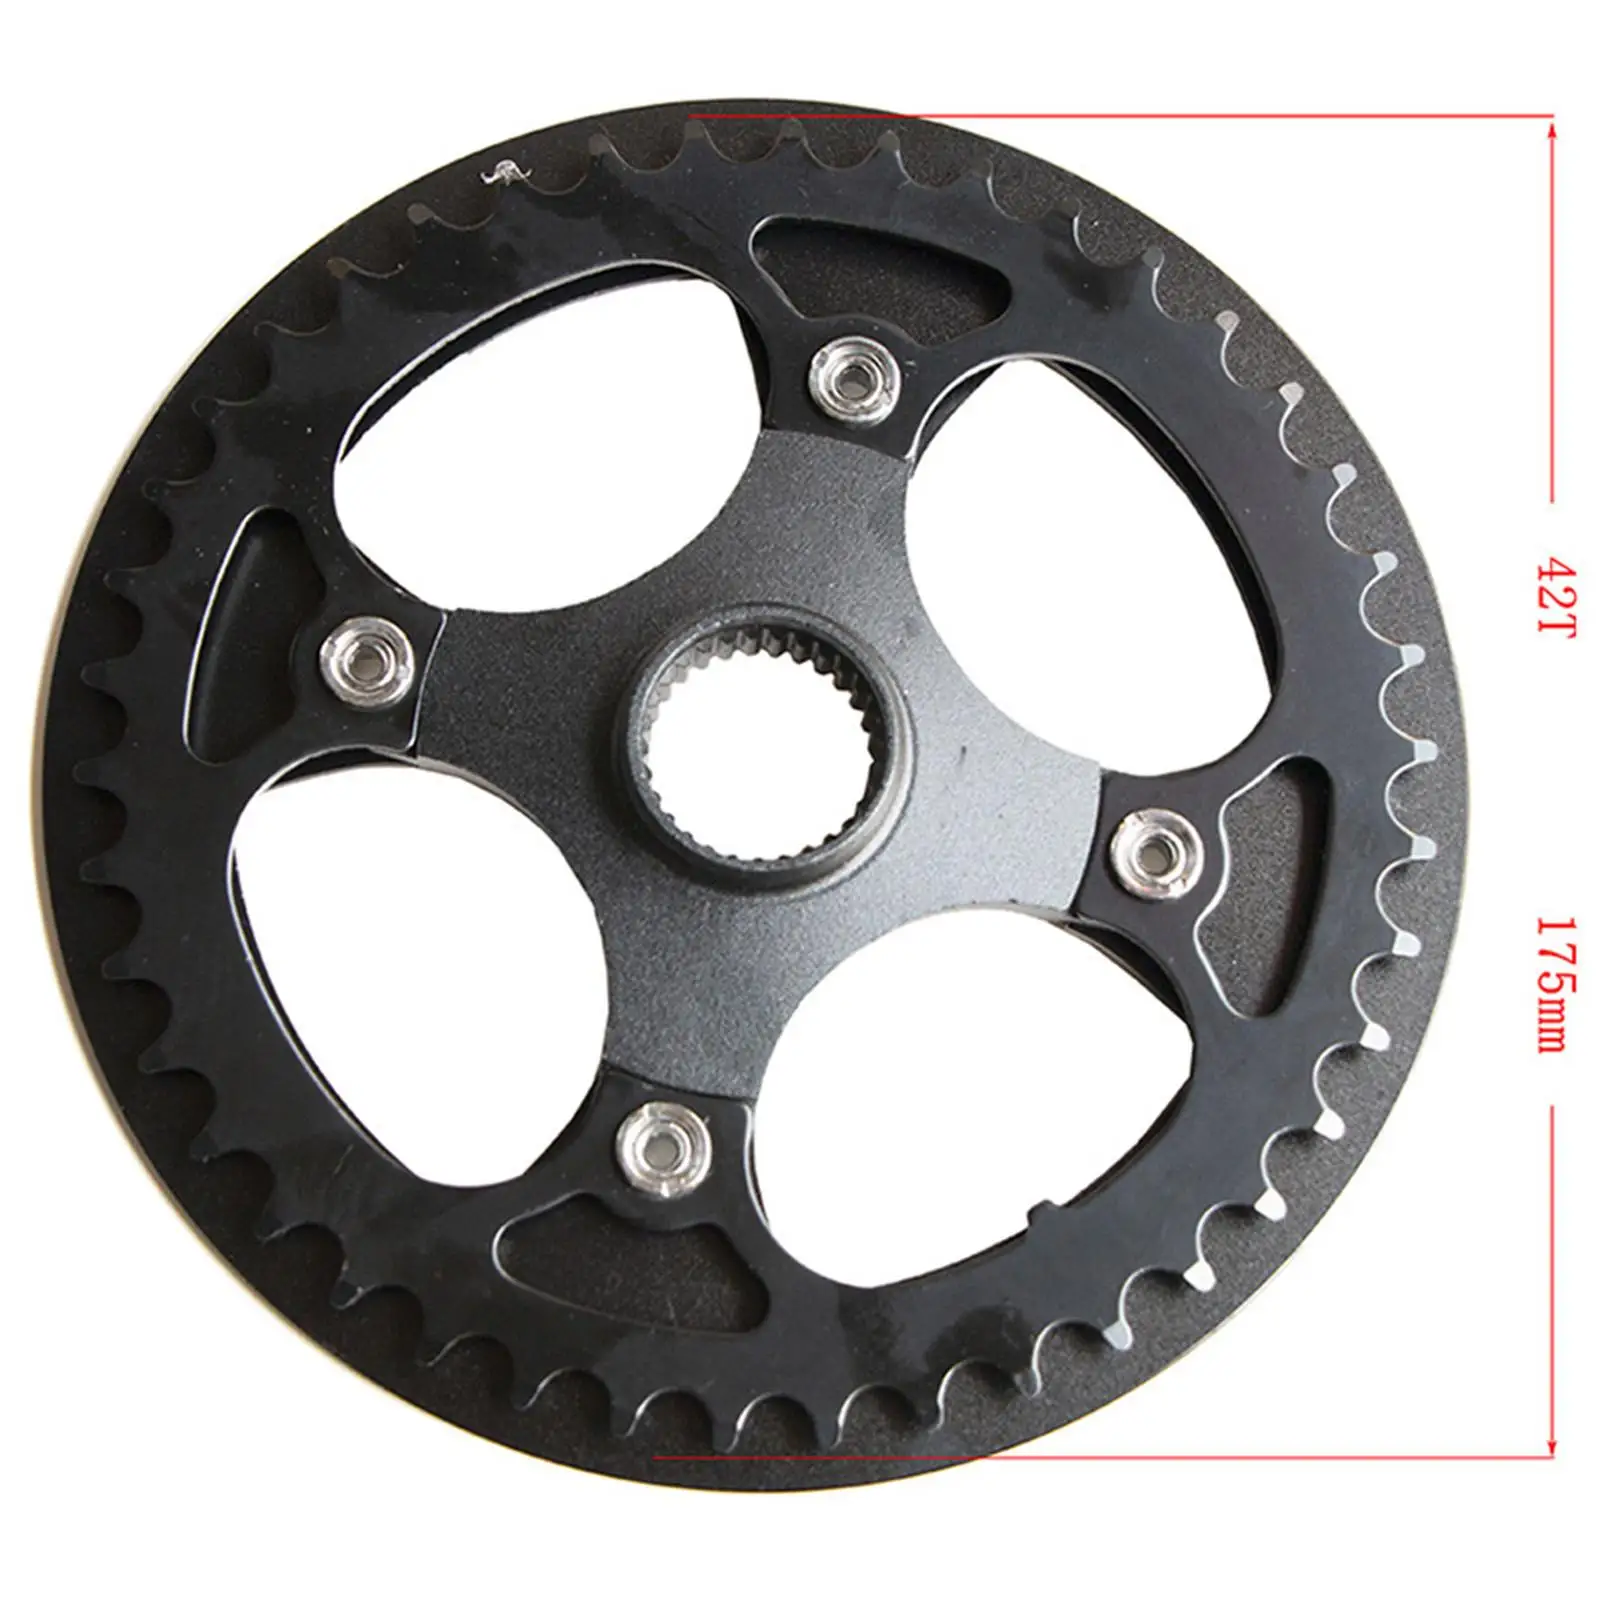 Electric Bike Chainring and Adapter Ultralight Aluminum Alloy Mid Motor Chainwheel with Guard Easy to Install for Repair Part